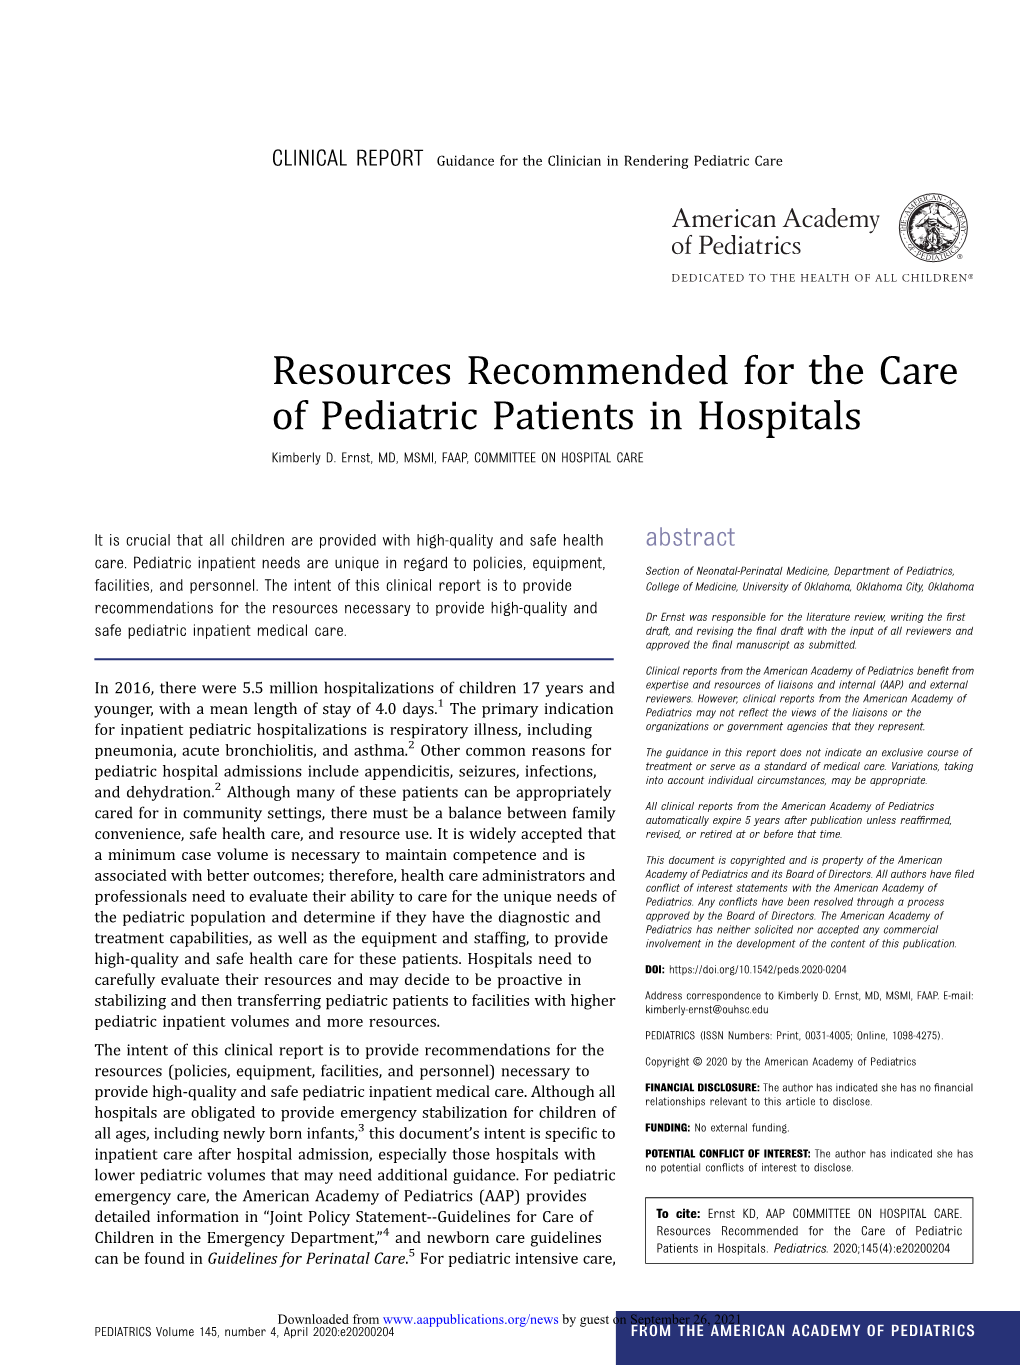 Resources Recommended for the Care of Pediatric Patients in Hospitals Kimberly D